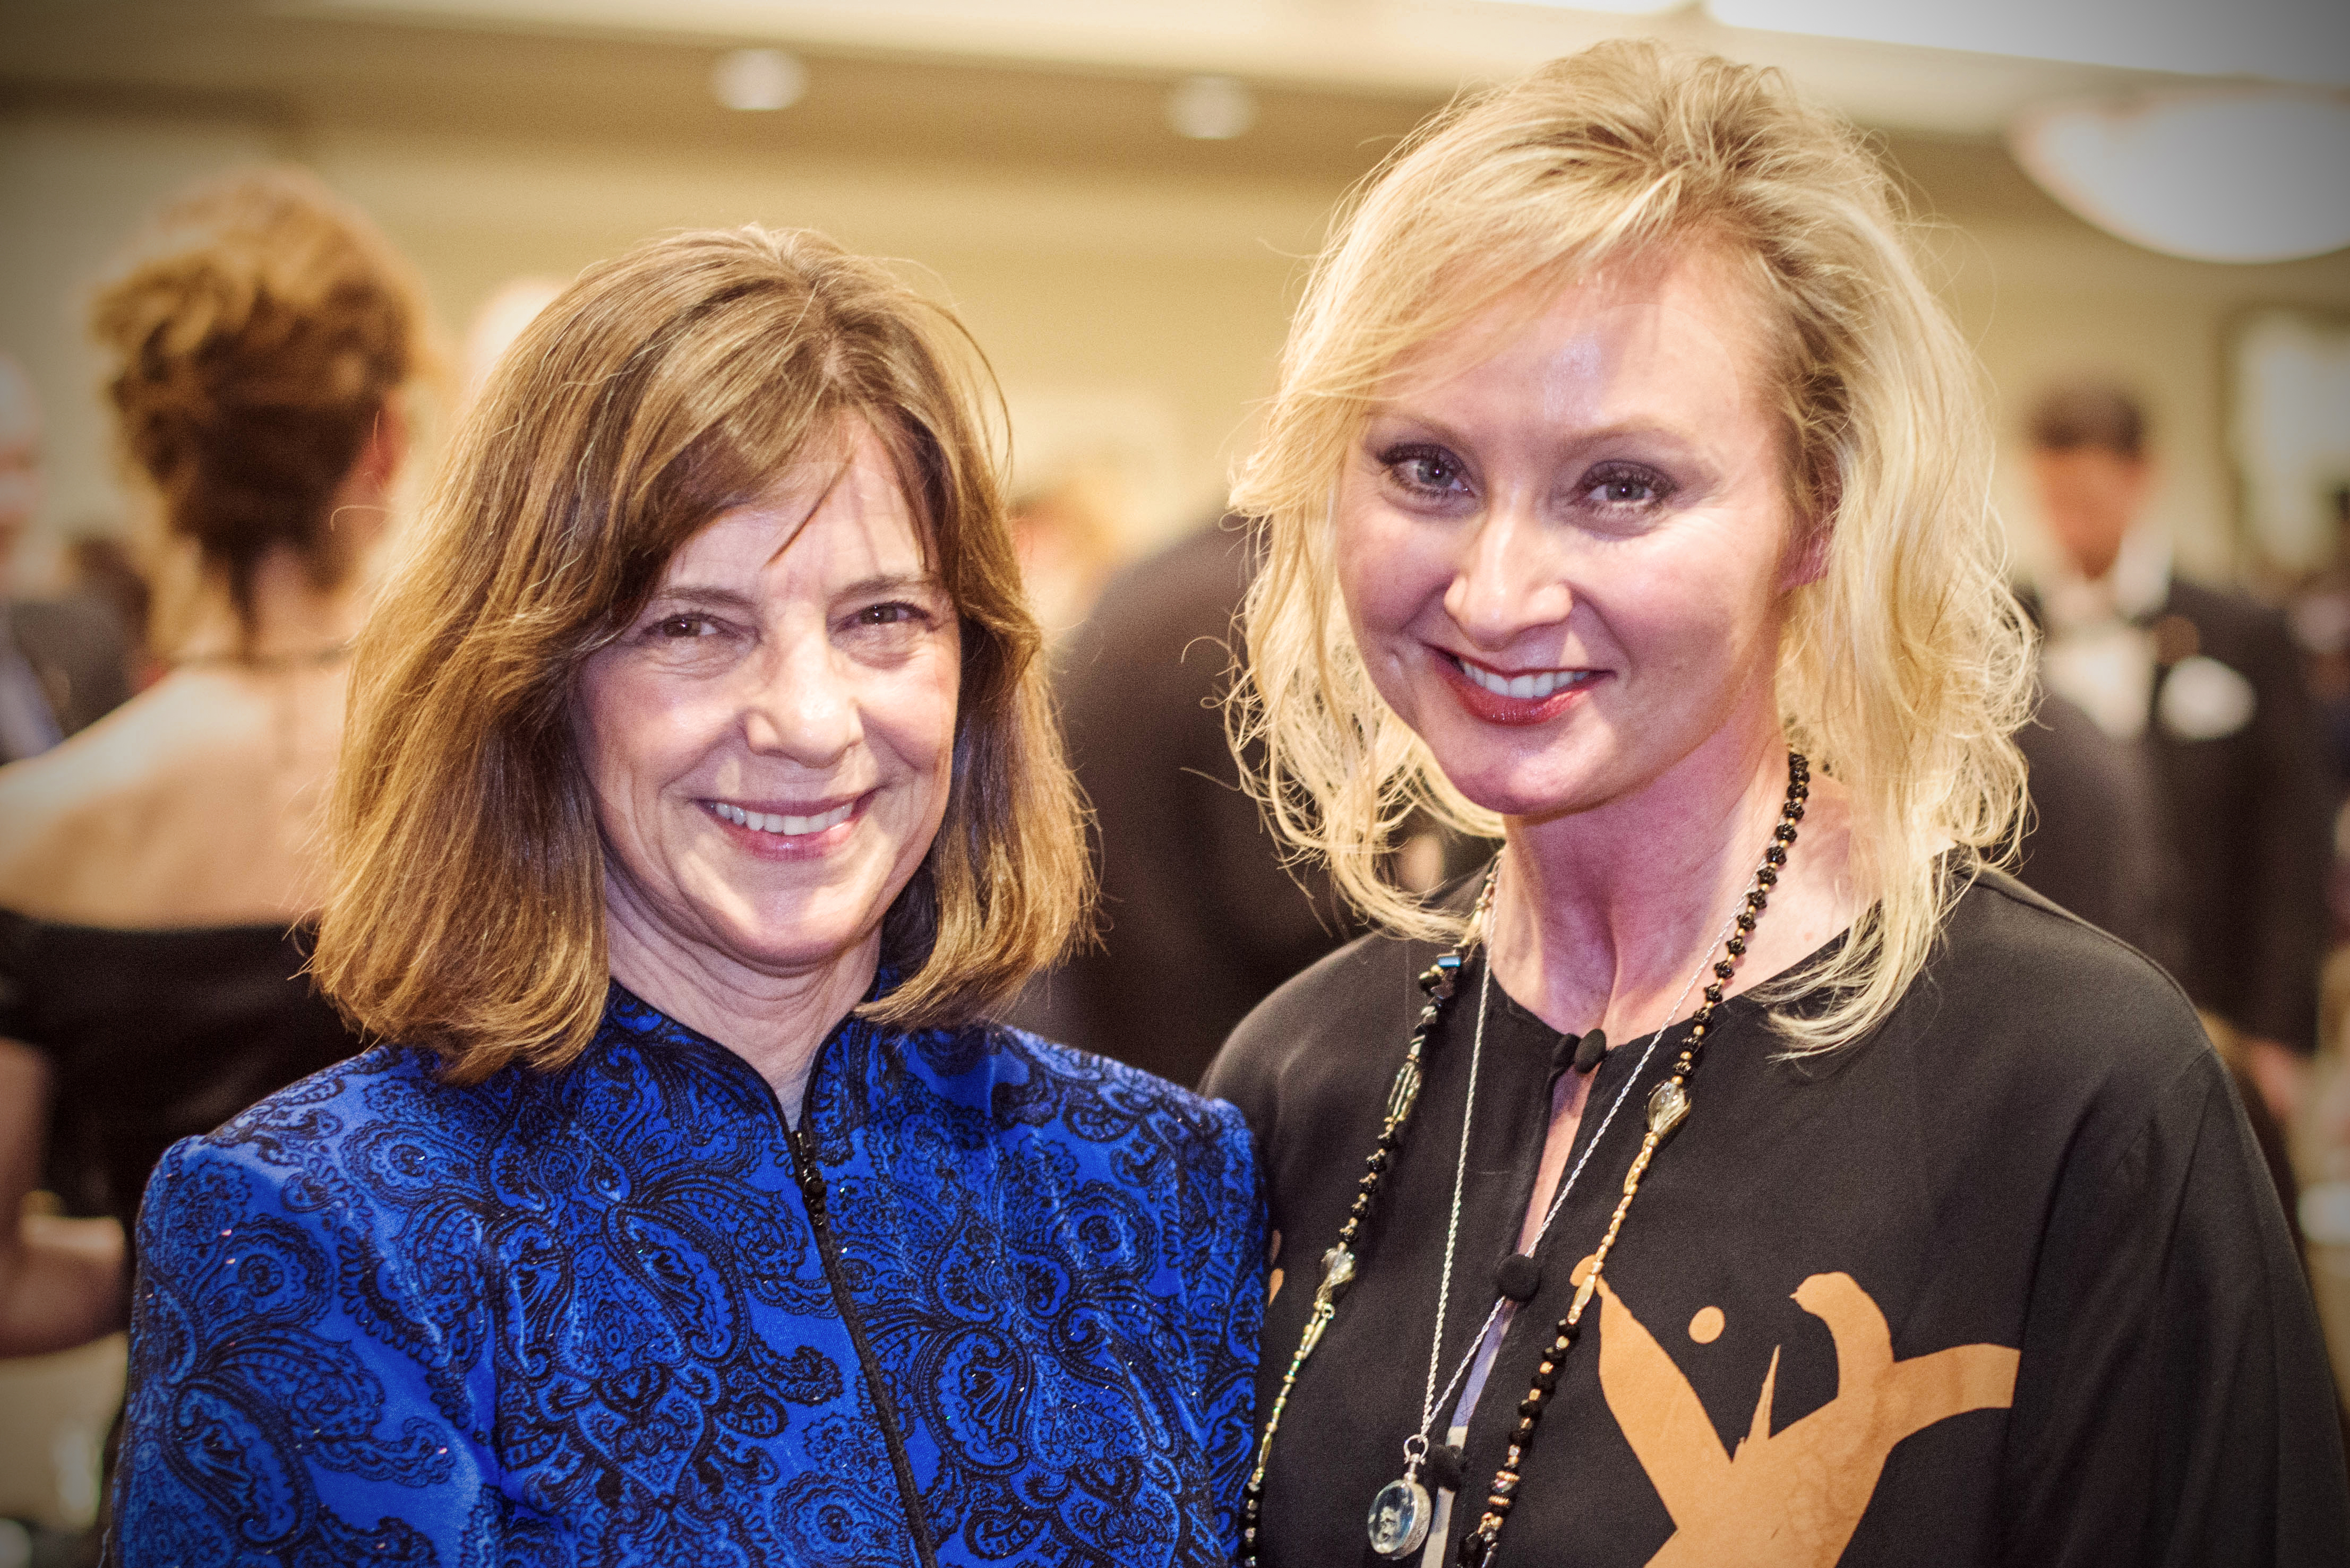 War Reporter Alex Quade with her idol, Astronaut Dr.Bonnie Dunbar at a military veterans gala in Washington. Alex was the keynote speaker at the sold-out event.